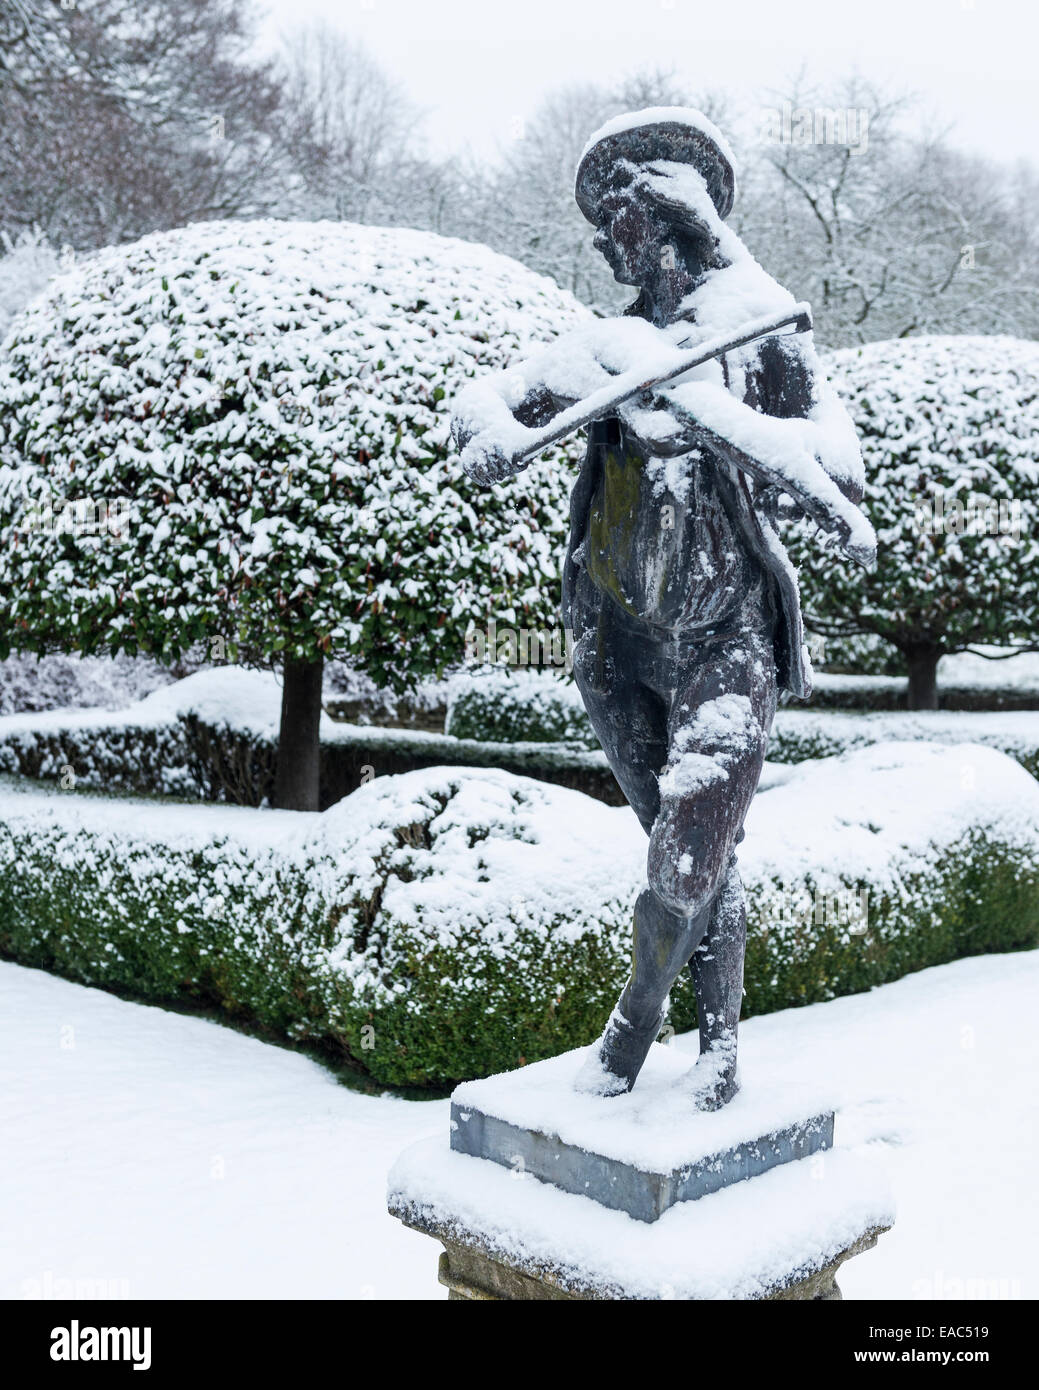 Snow dusted statue in the garden of cornwell manor Stock Photo